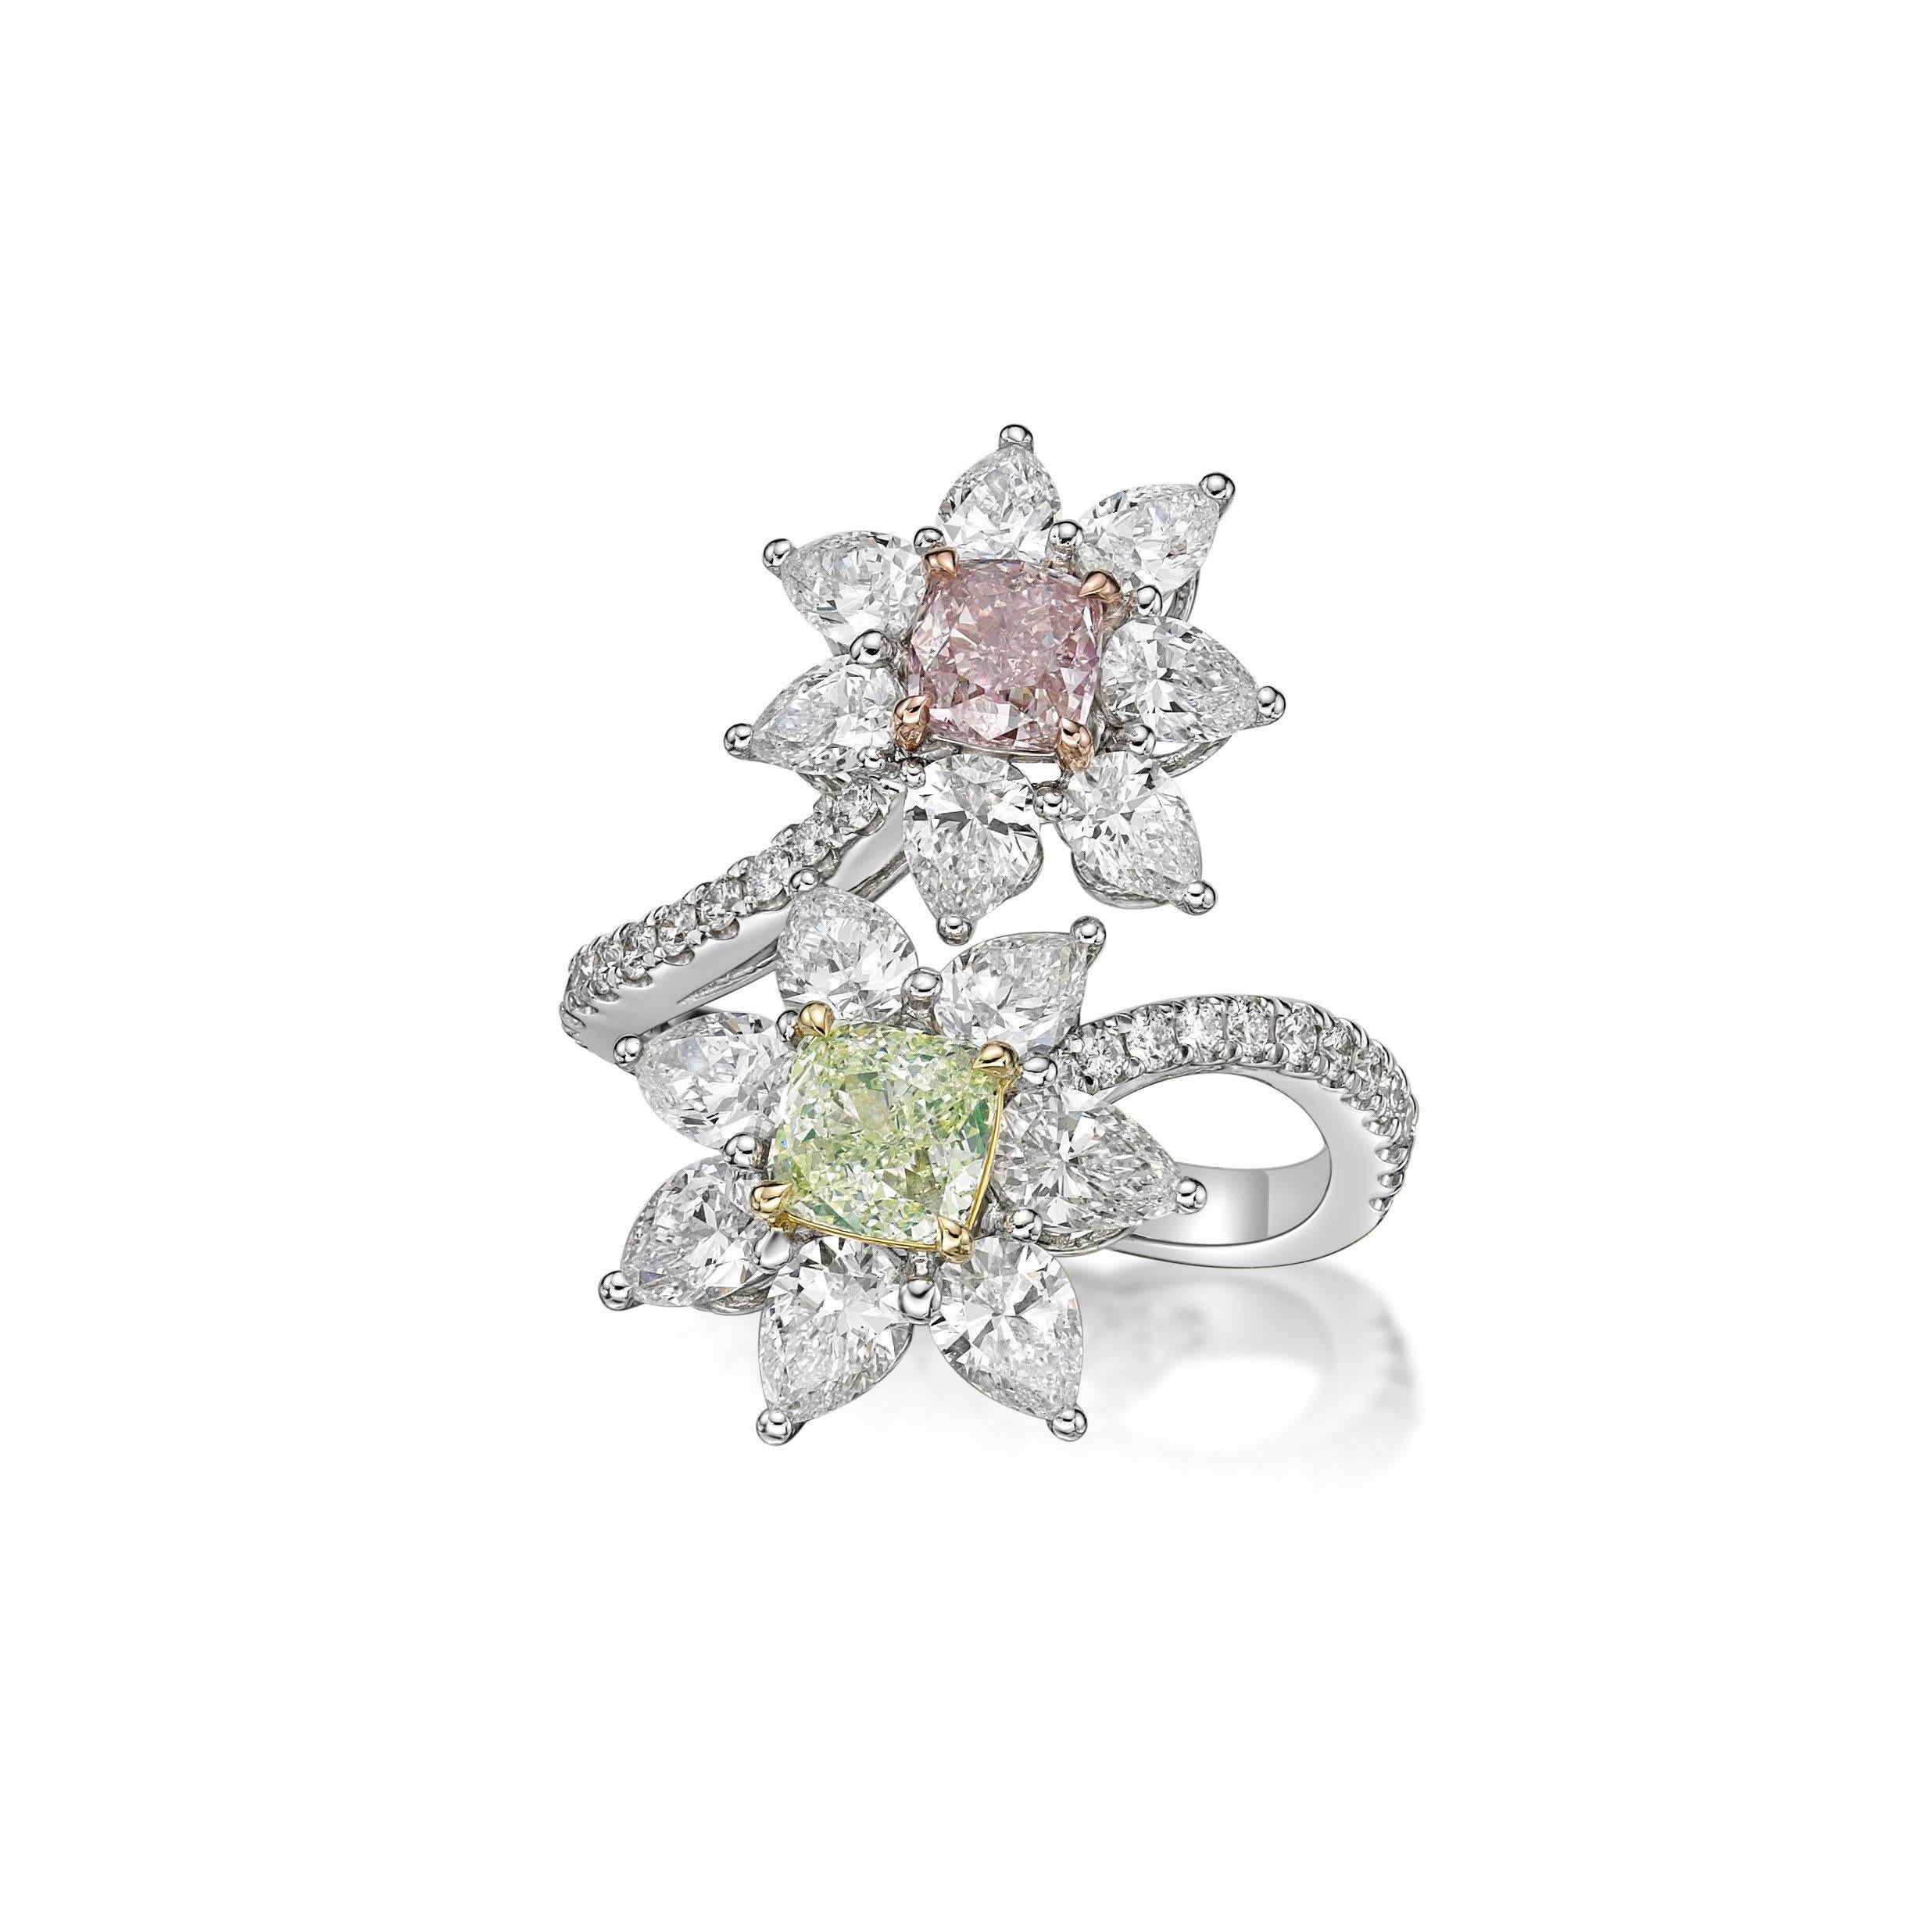 Emilio Jewelry Gia Certified Fancy Green Pink 4.10 Carat Diamond Ring In New Condition For Sale In New York, NY